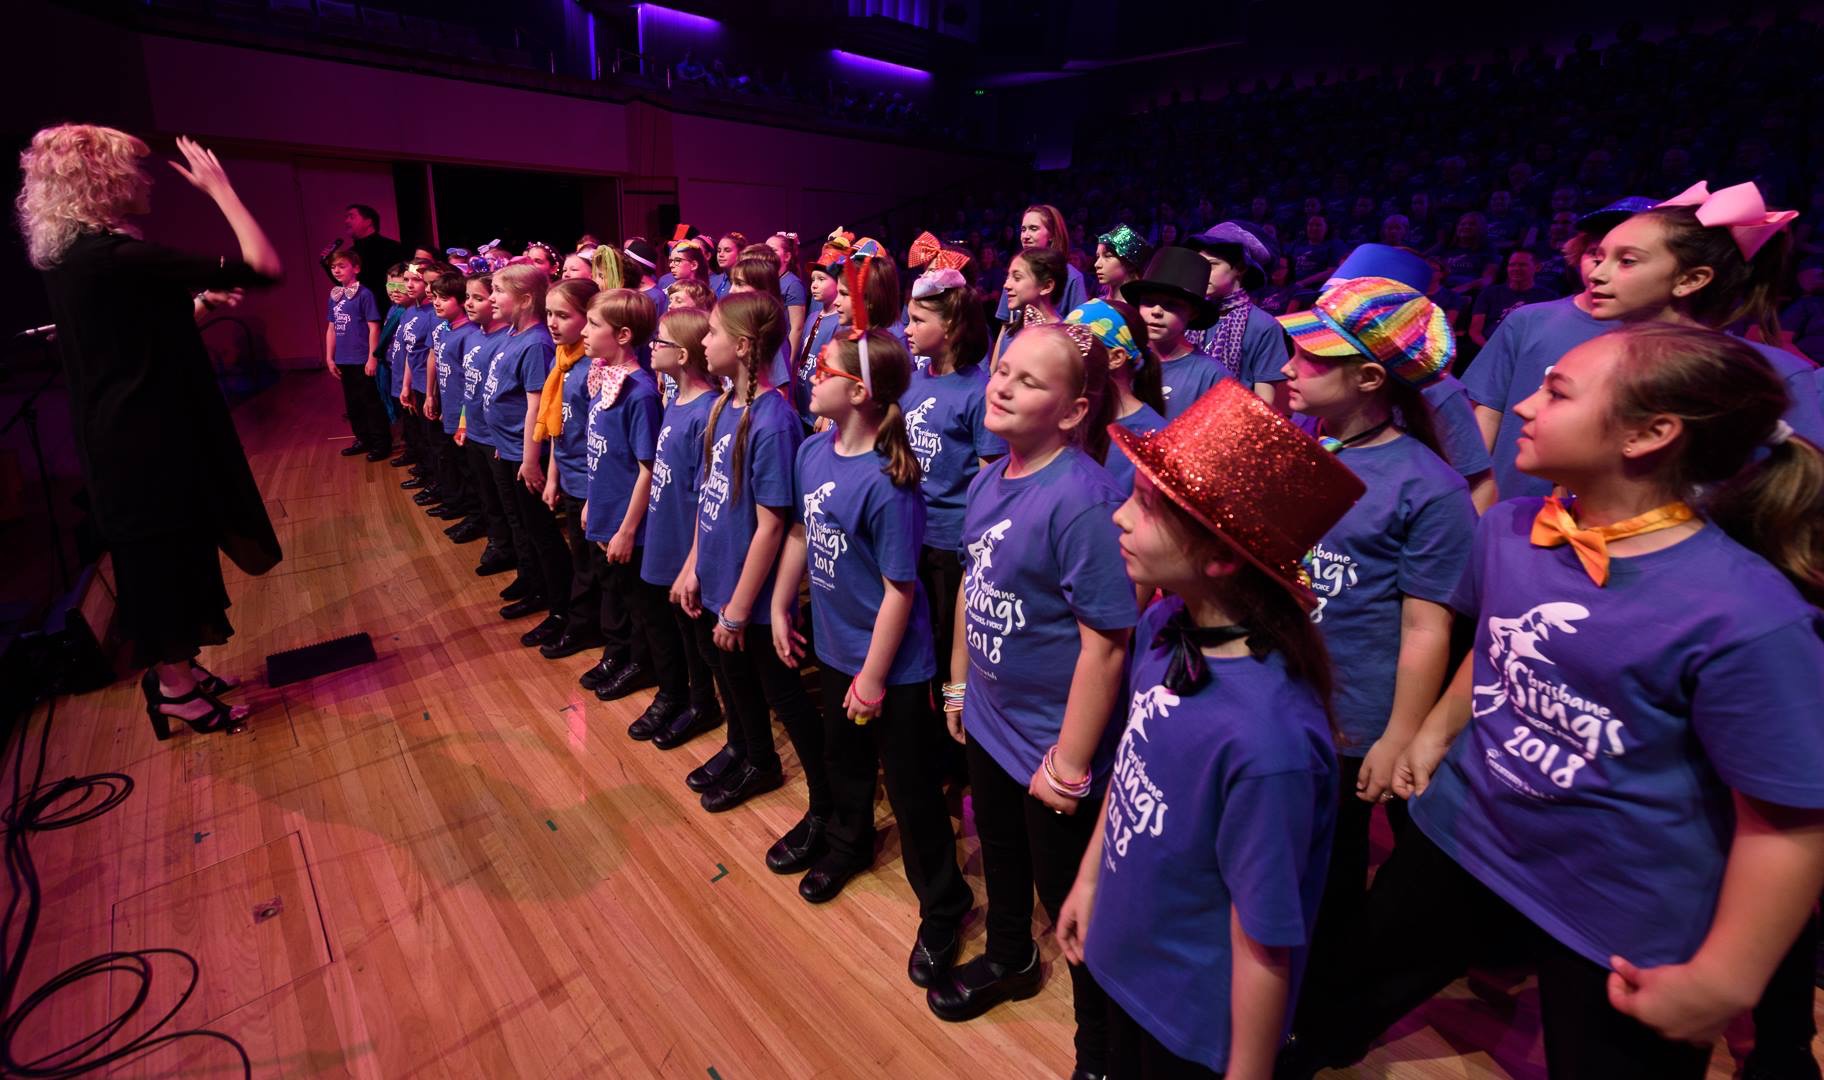 The Junior choirs sing songs from Willy Wonka